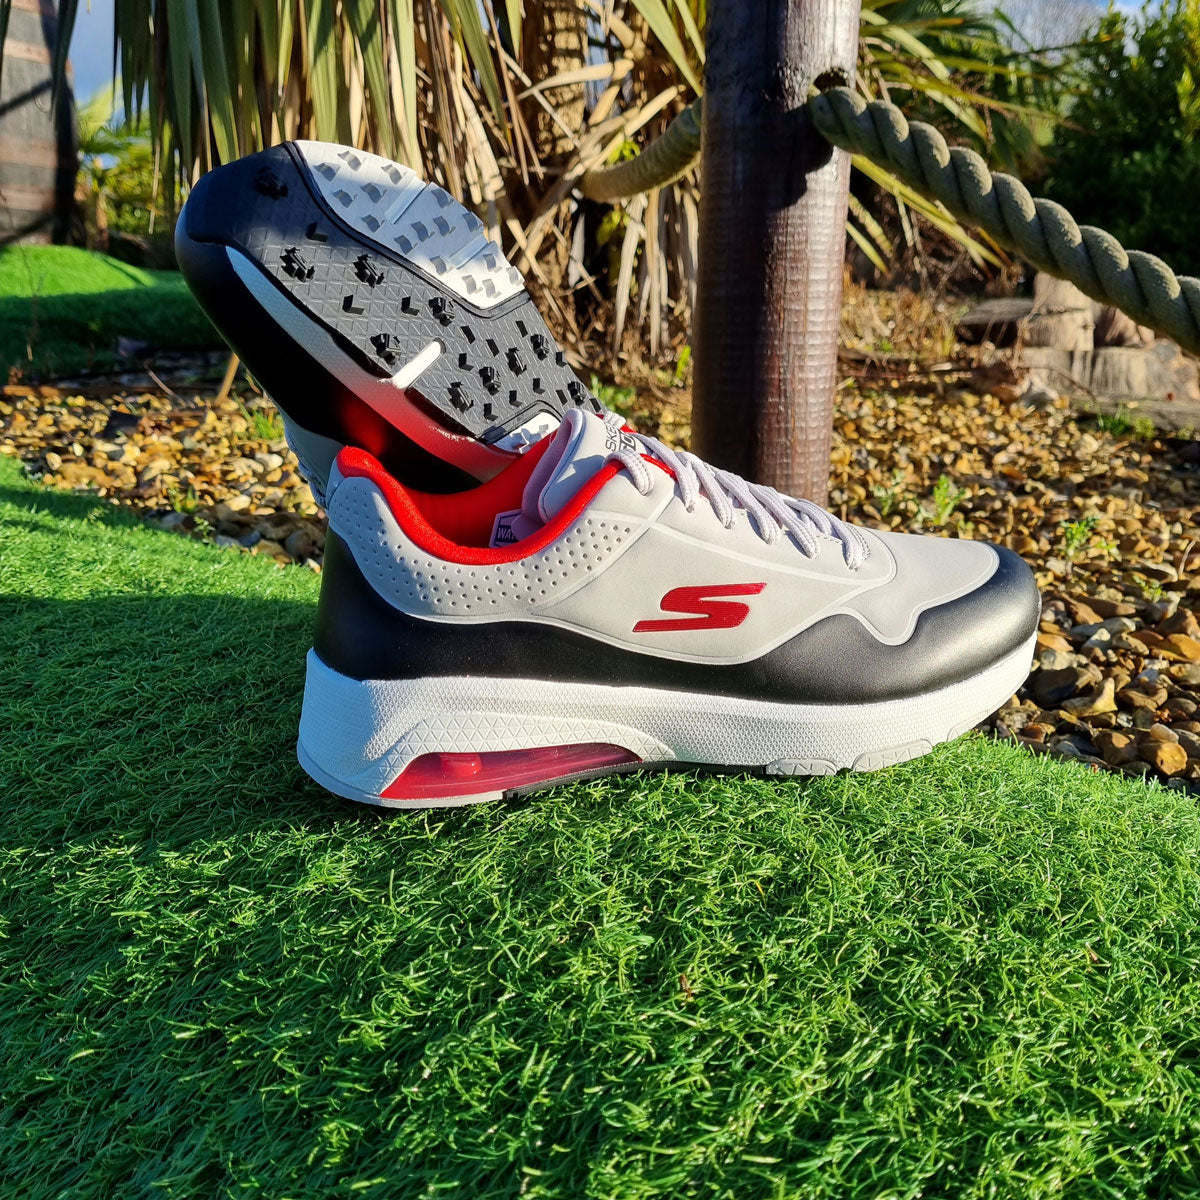 Skechers Golf Shoes - Affordable Prices